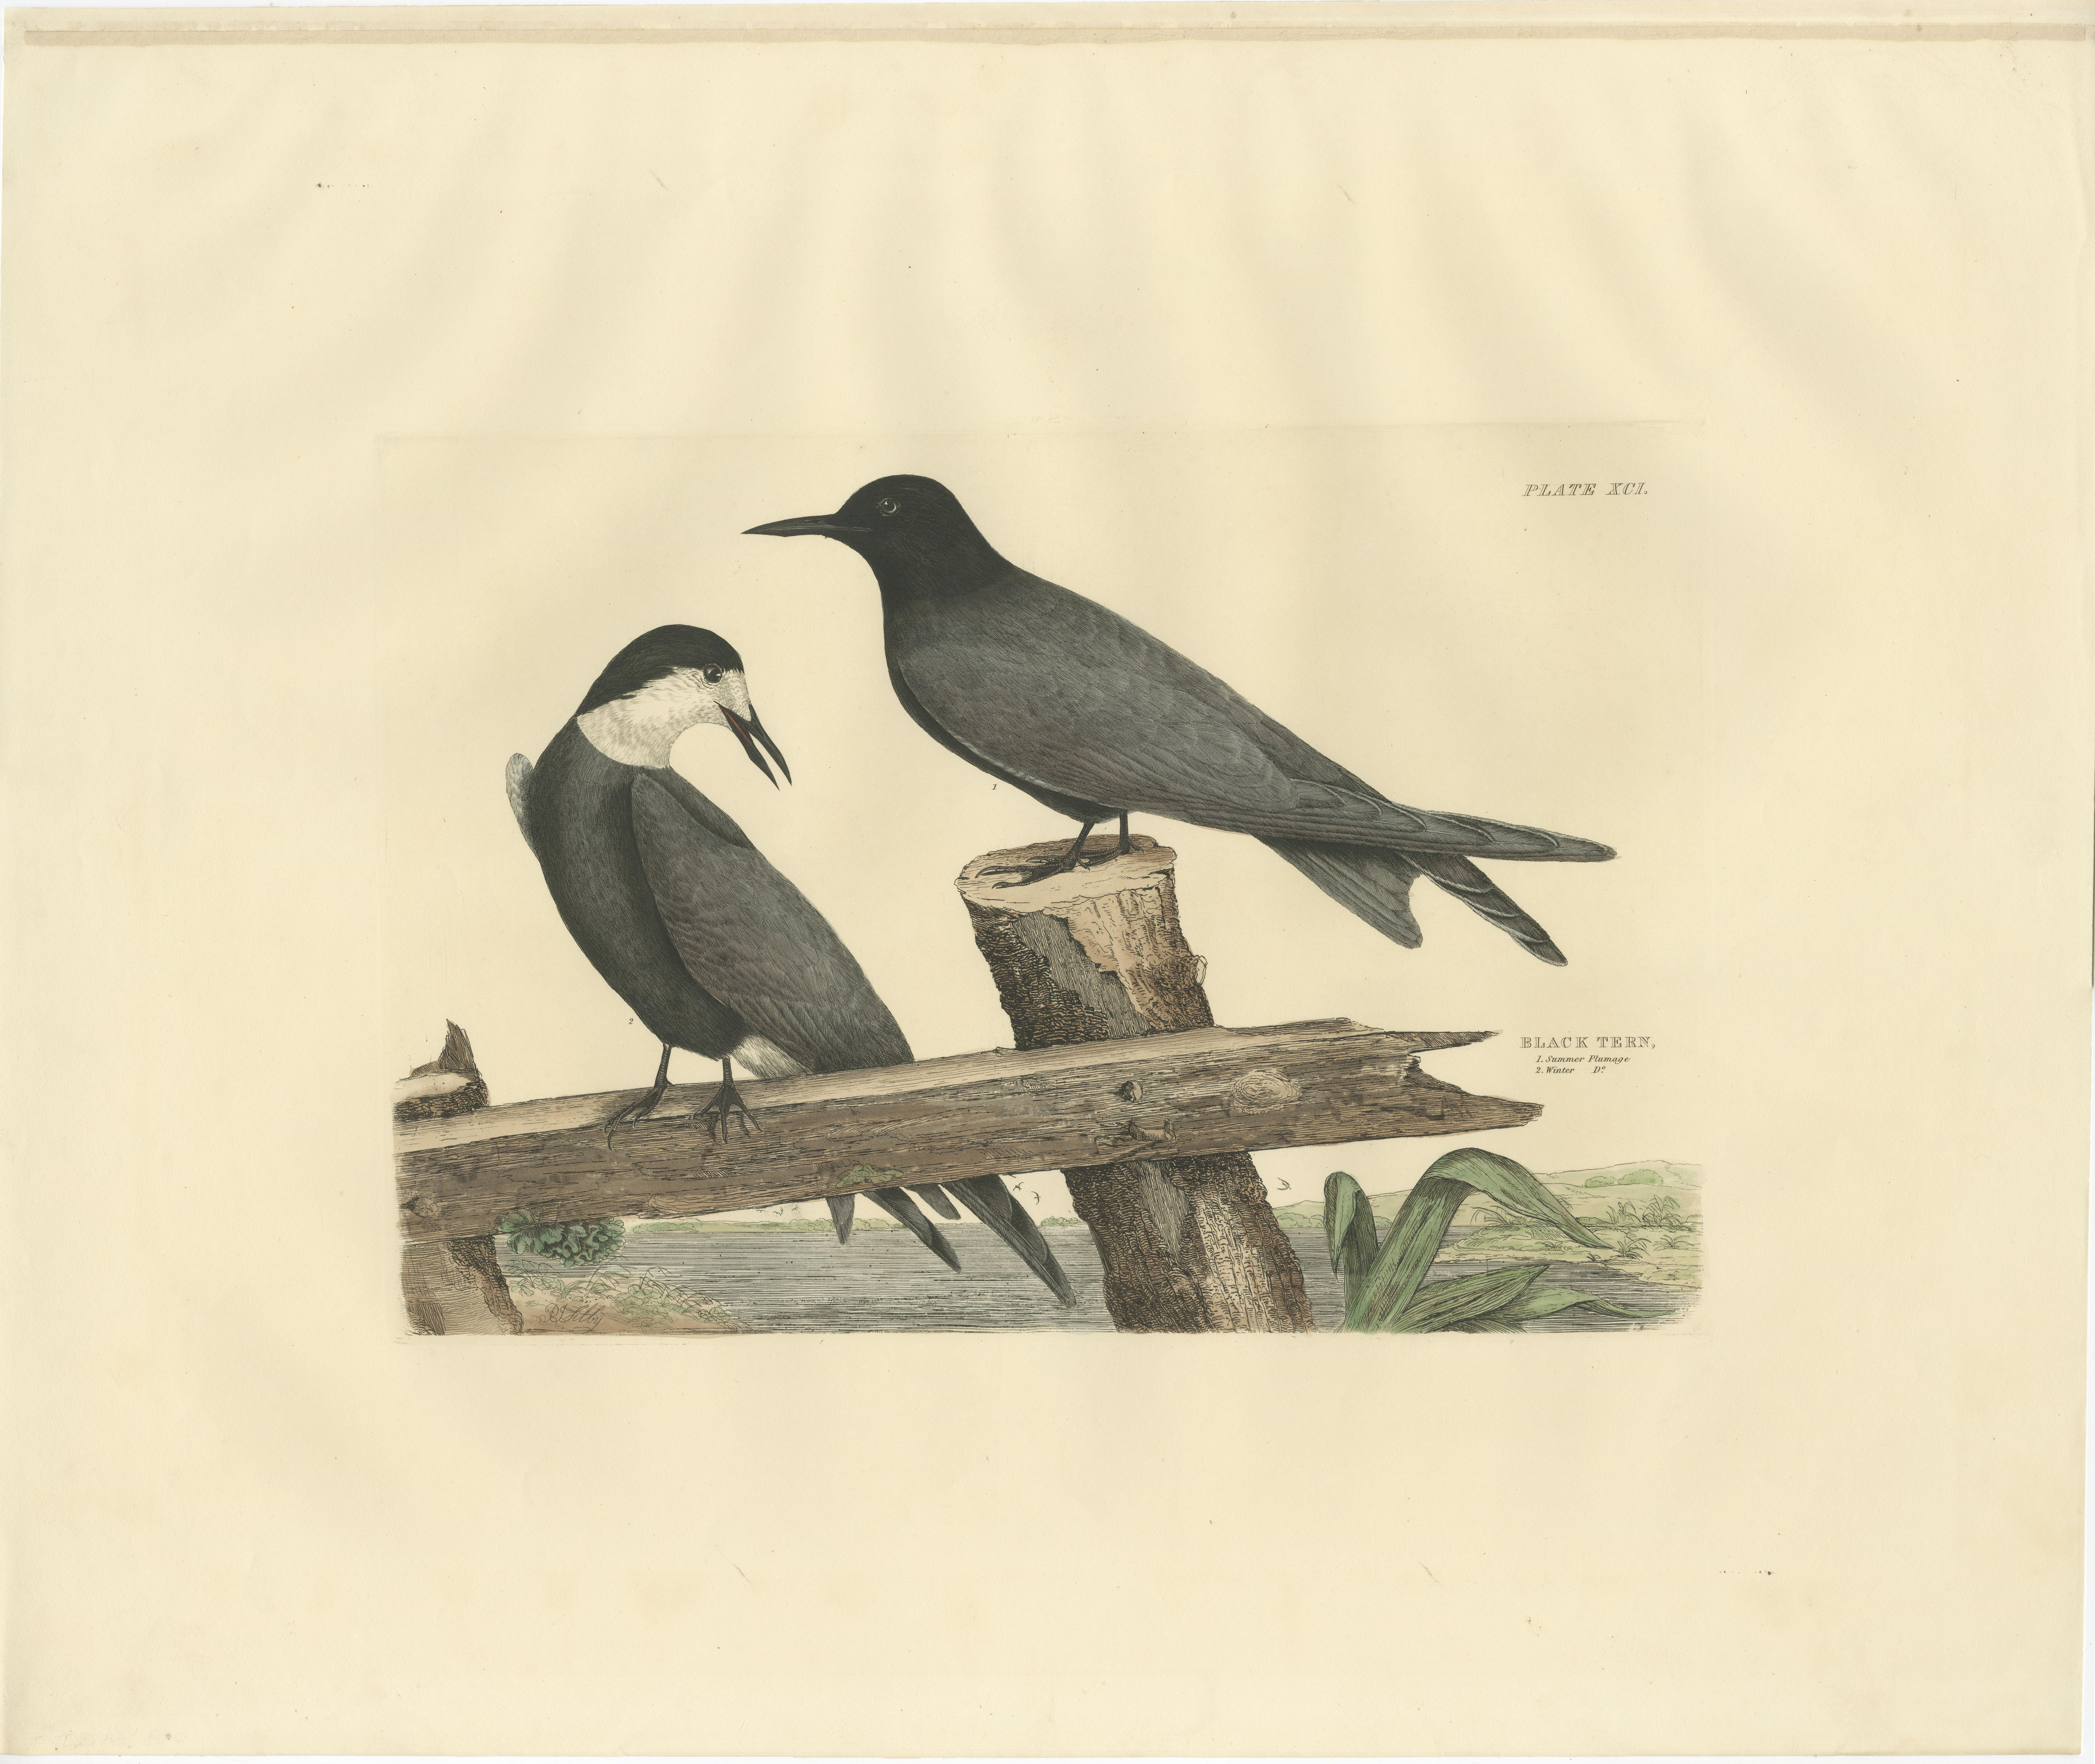 Large original hand-colored antique ornithological print made by Selby and published around 1826. 

The print from Prideaux John Selby's 